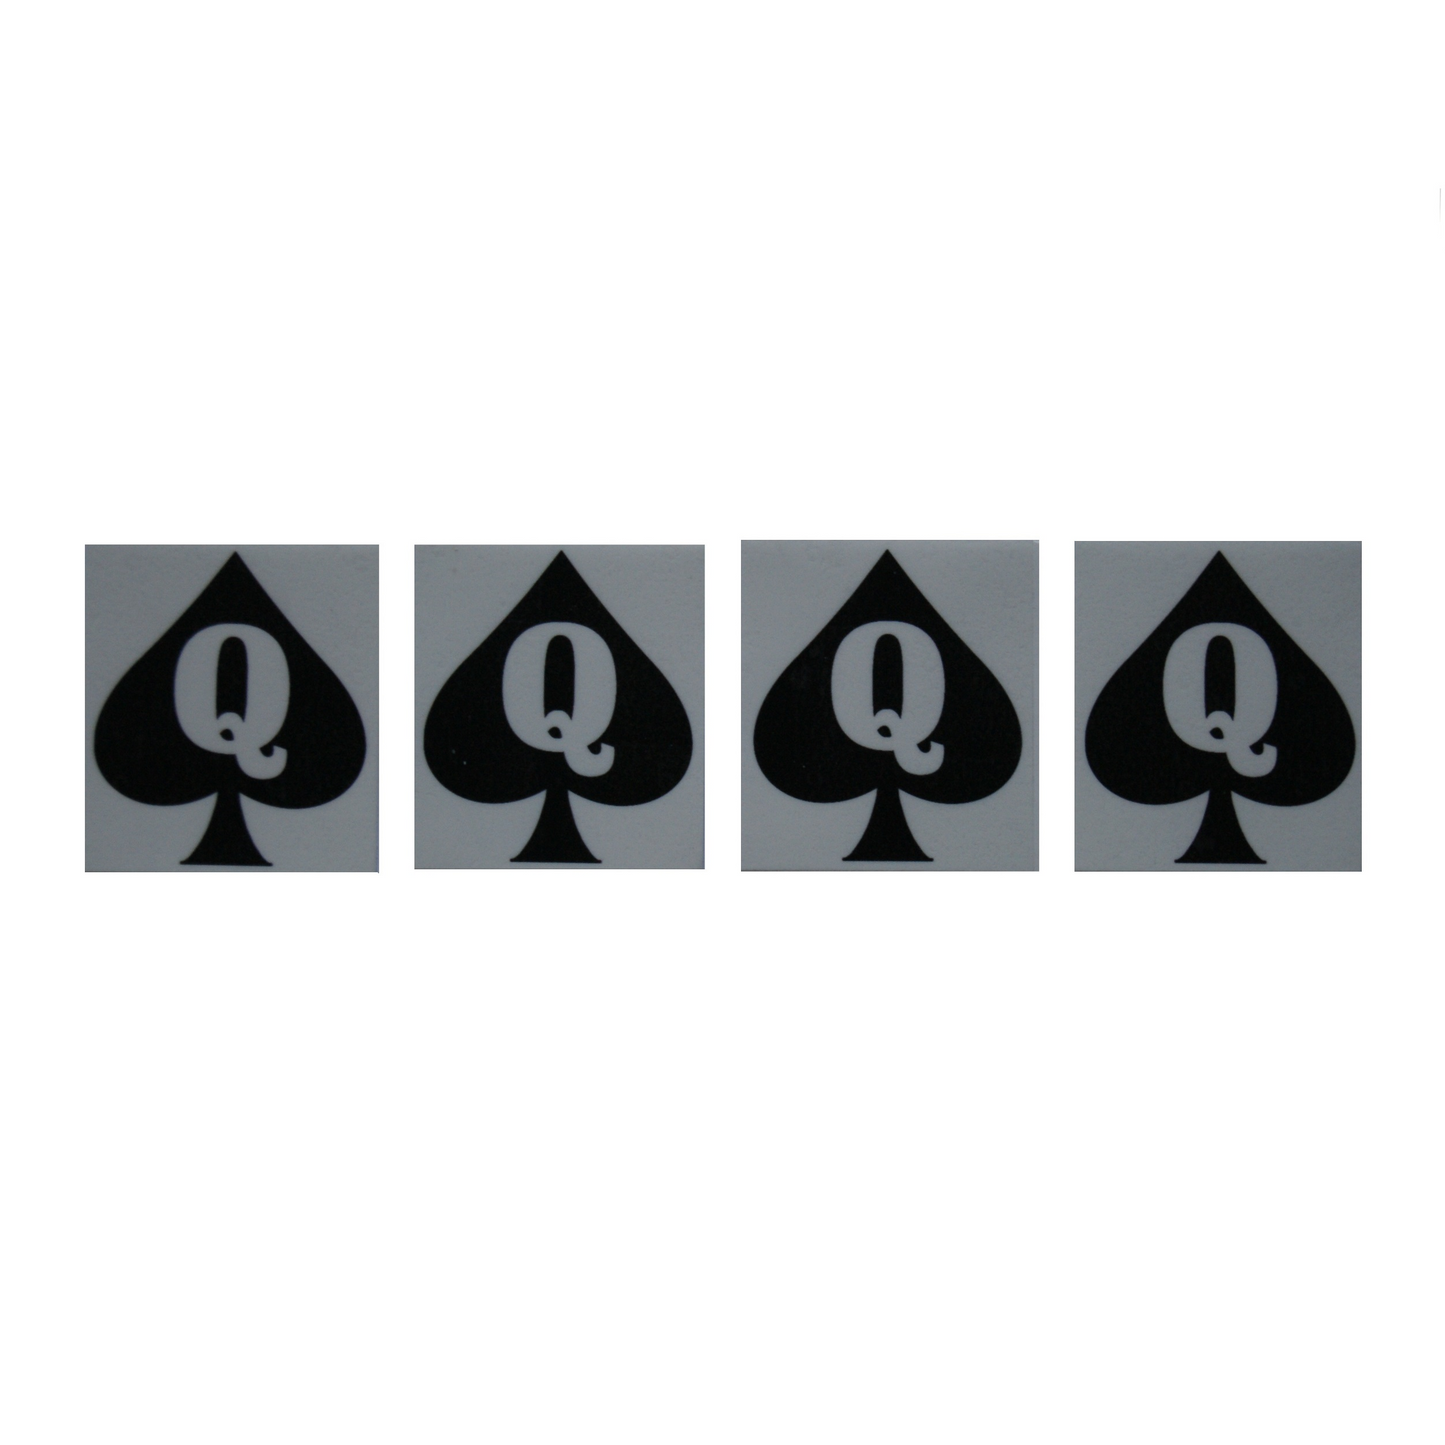 Pack of 4 - Hotwife Temporary Tattoos - Queen Of Spades (Cuckold)